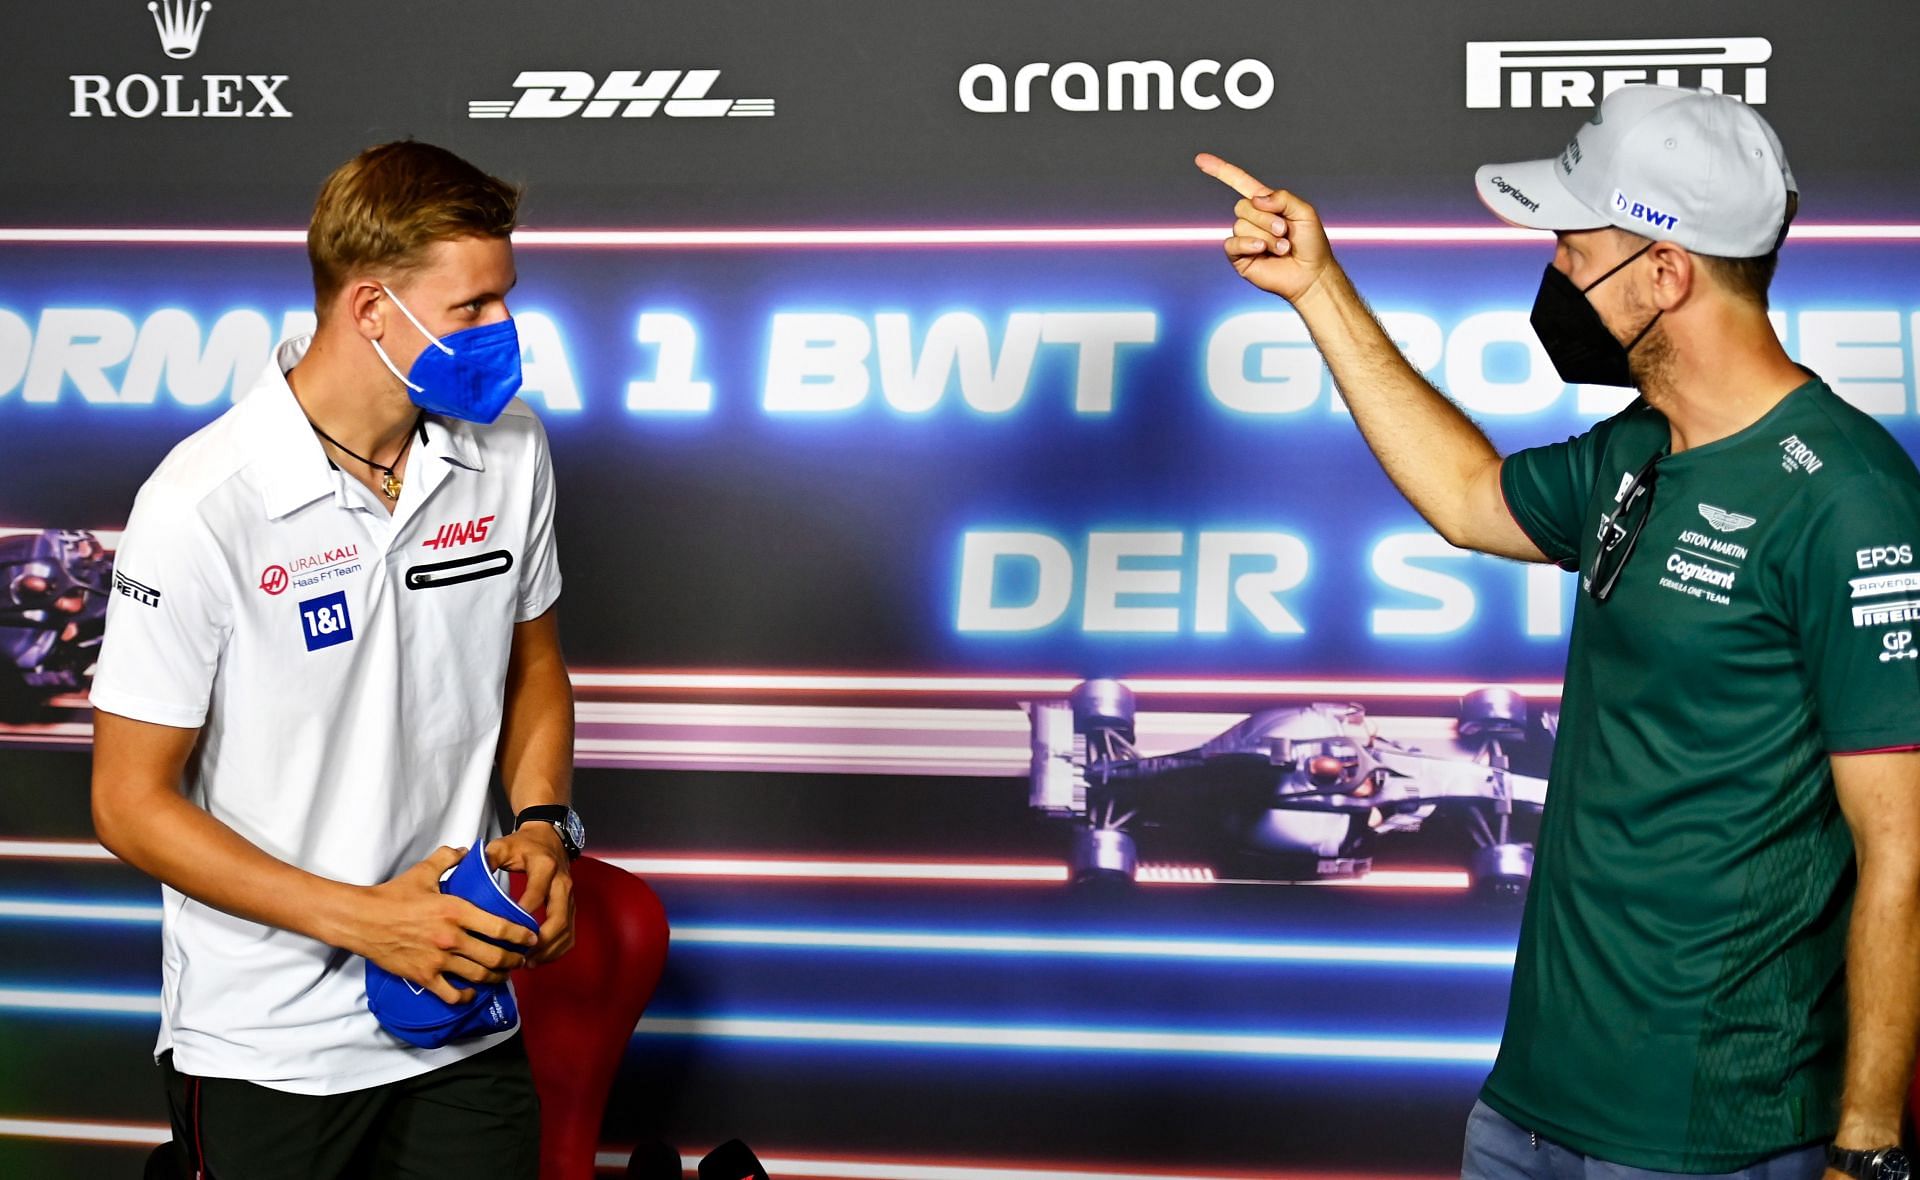 Mick Schumacher (left) and Sebastian Vettel (right) at the F1 Grand Prix of Styria - Previews